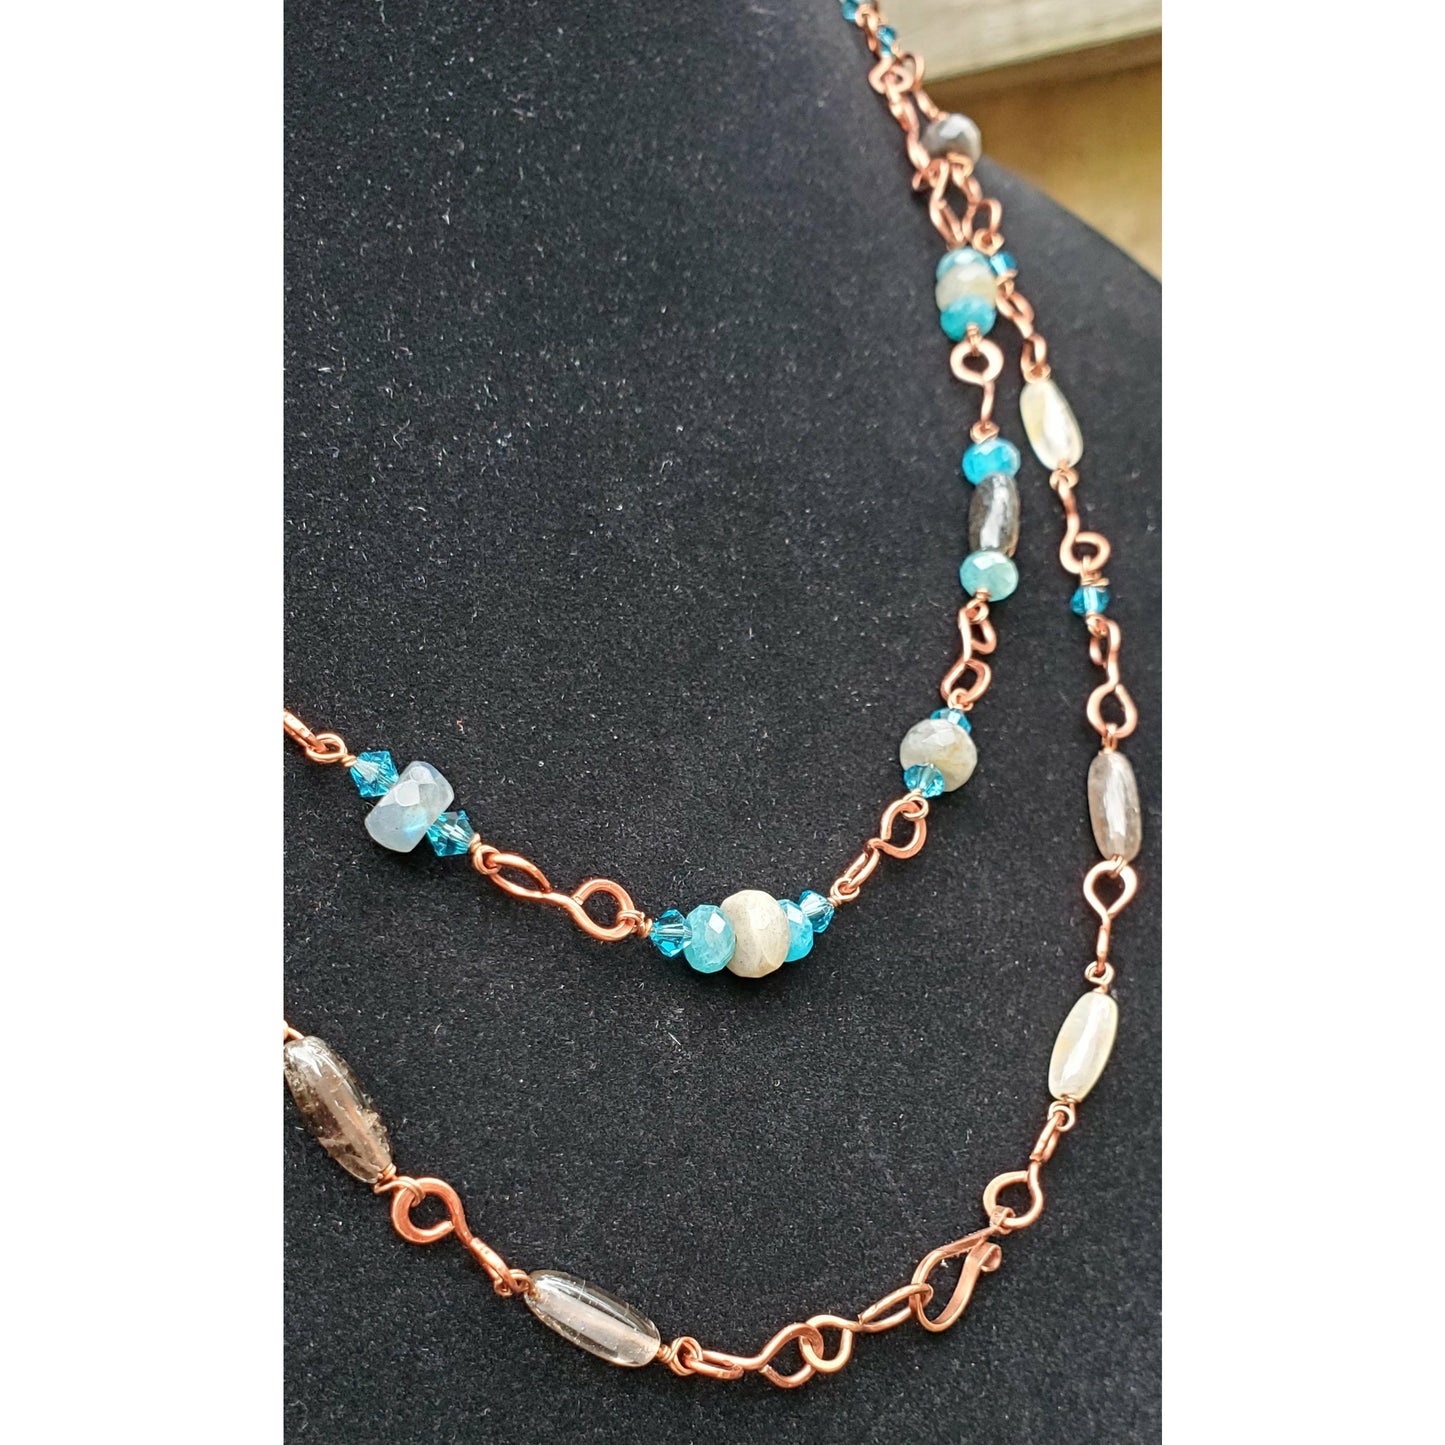 Forged Moonstone, Labradorite, Apatite and Blue Crystal Necklace